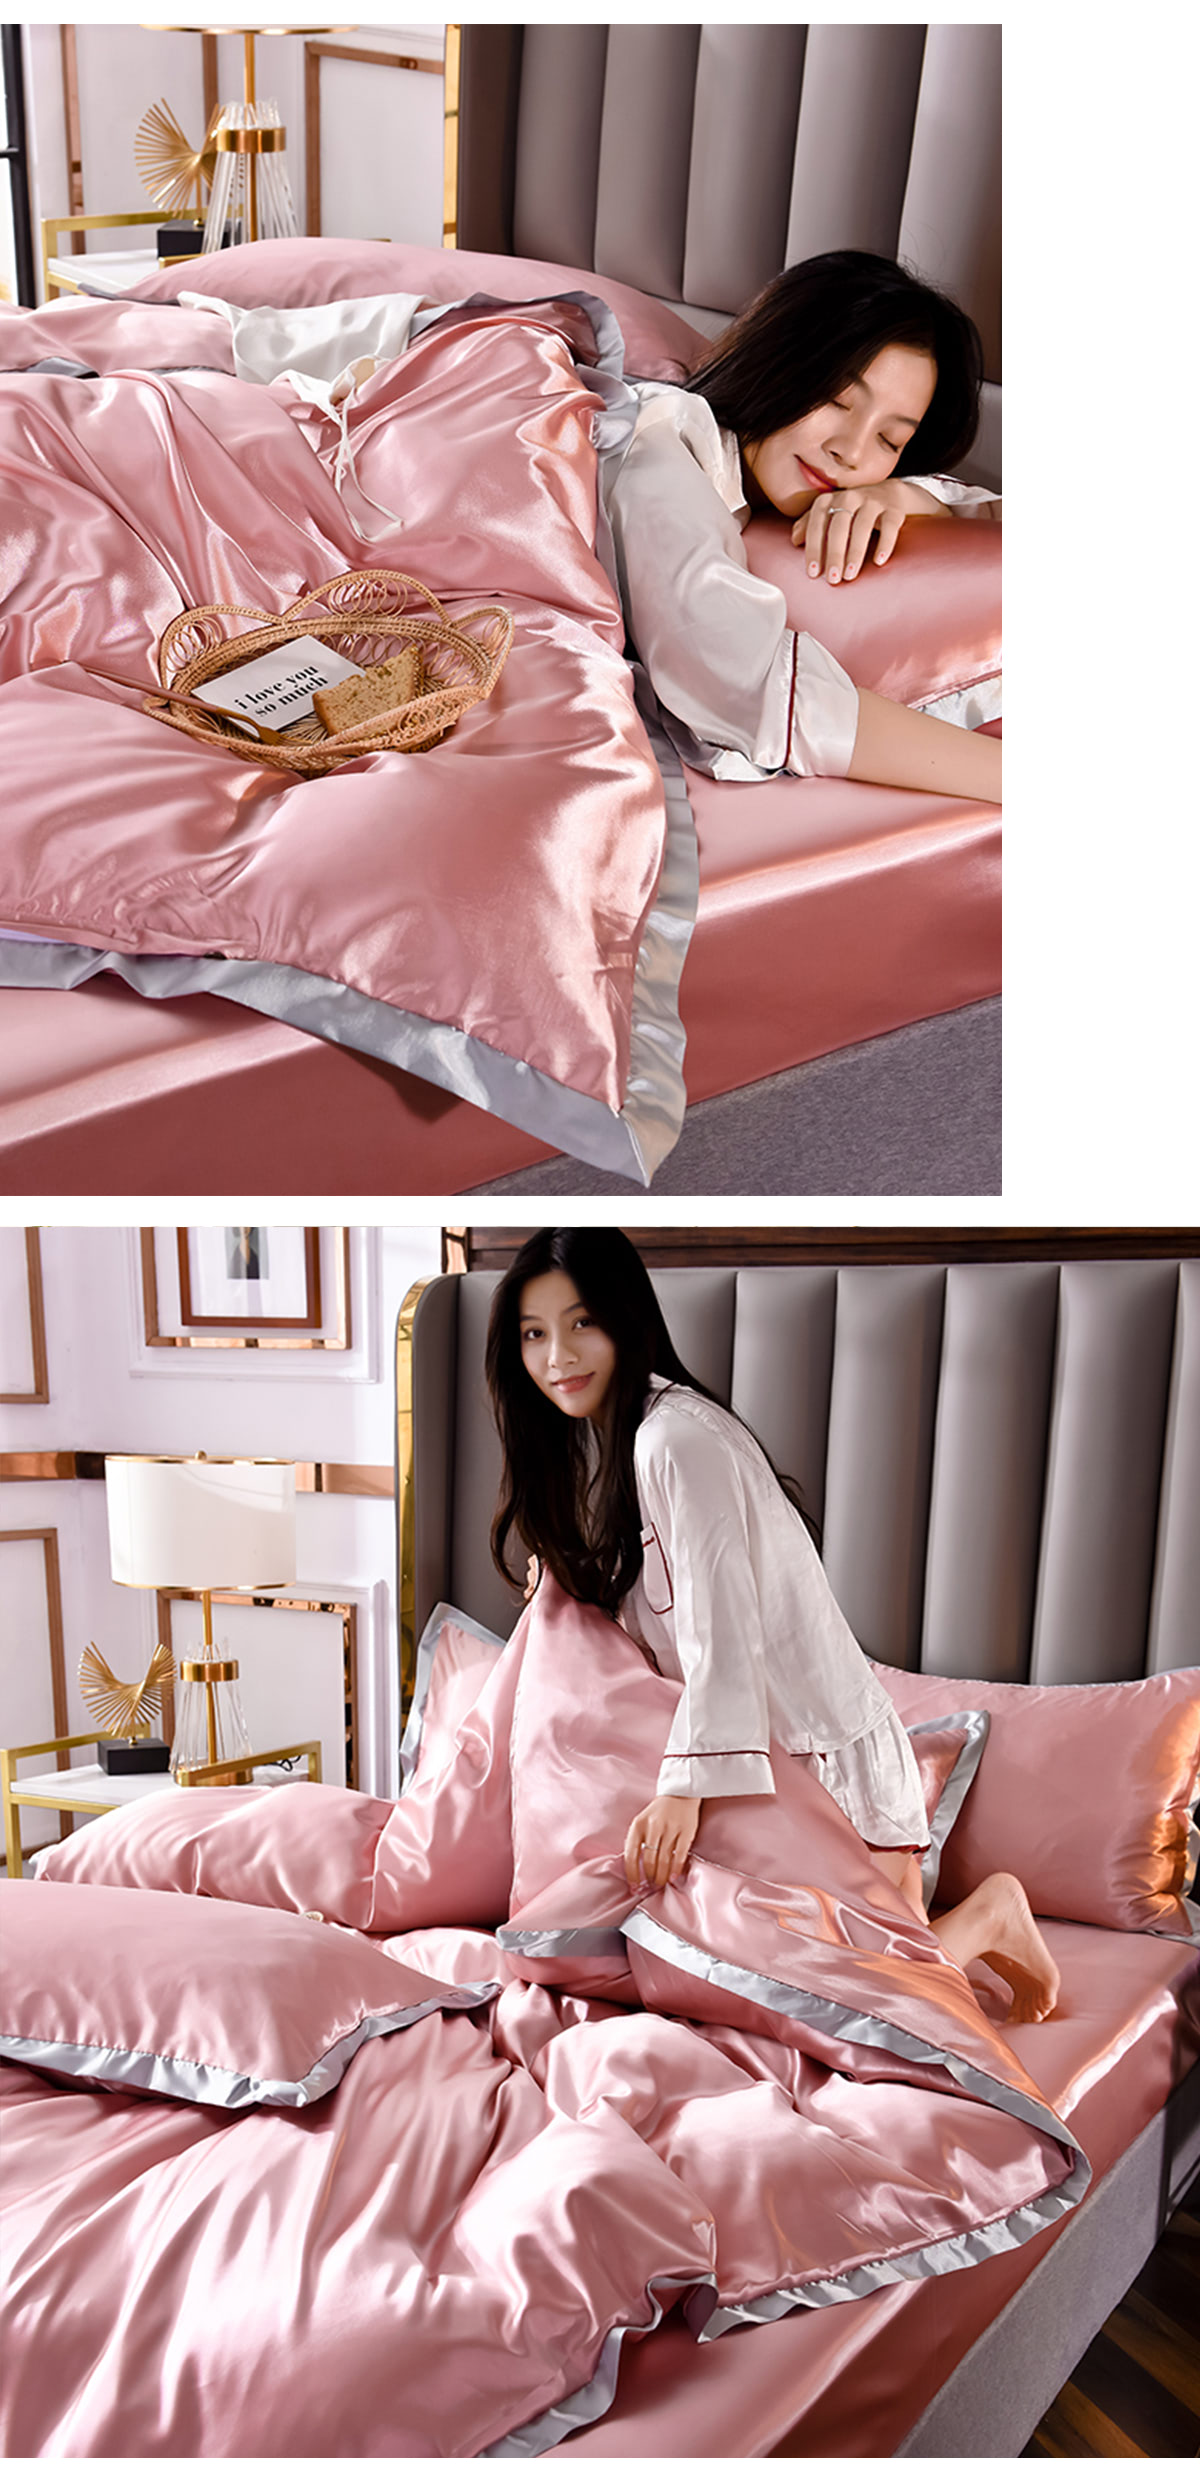 Fresh-and-Soft-Comfortable-Satin-Bed-Cover-Sheet-Set37.jpg